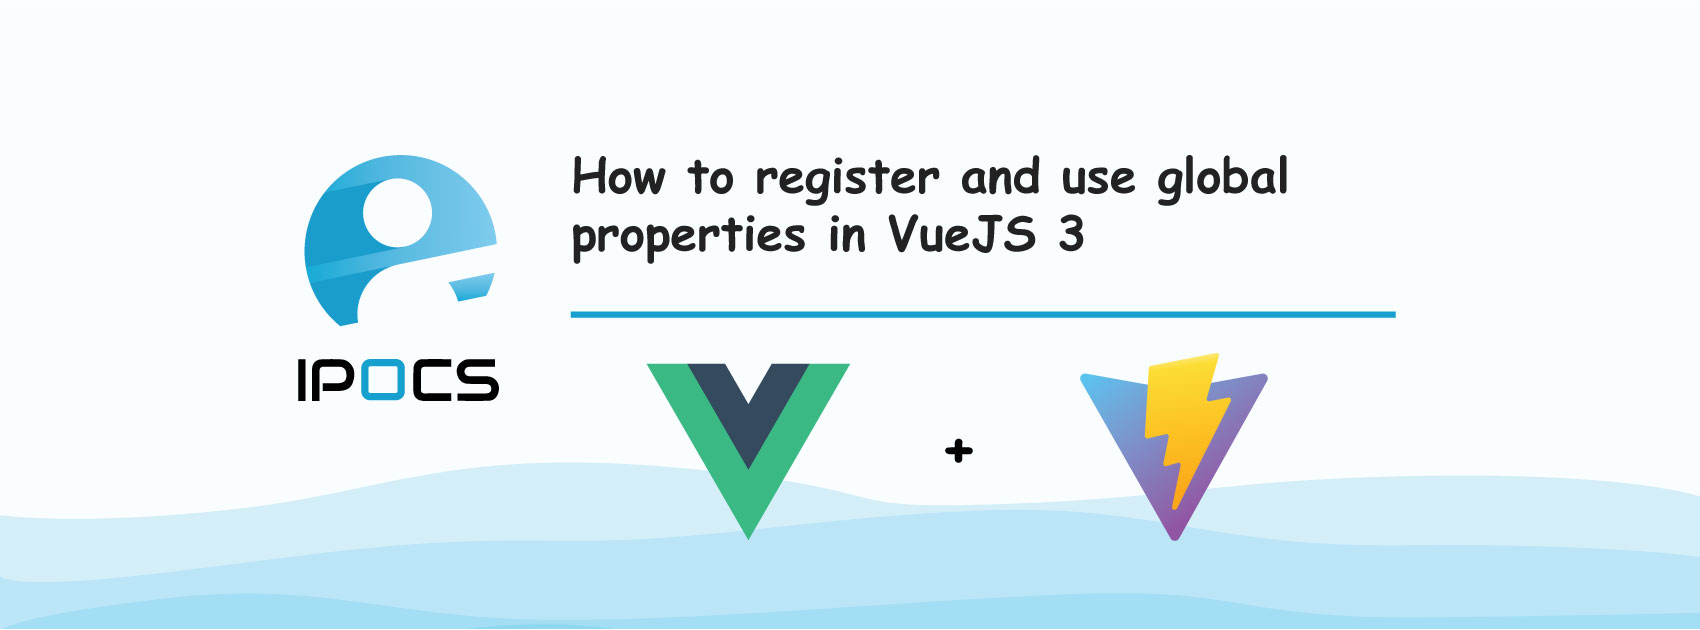 How to register and use global properties in VueJS 3